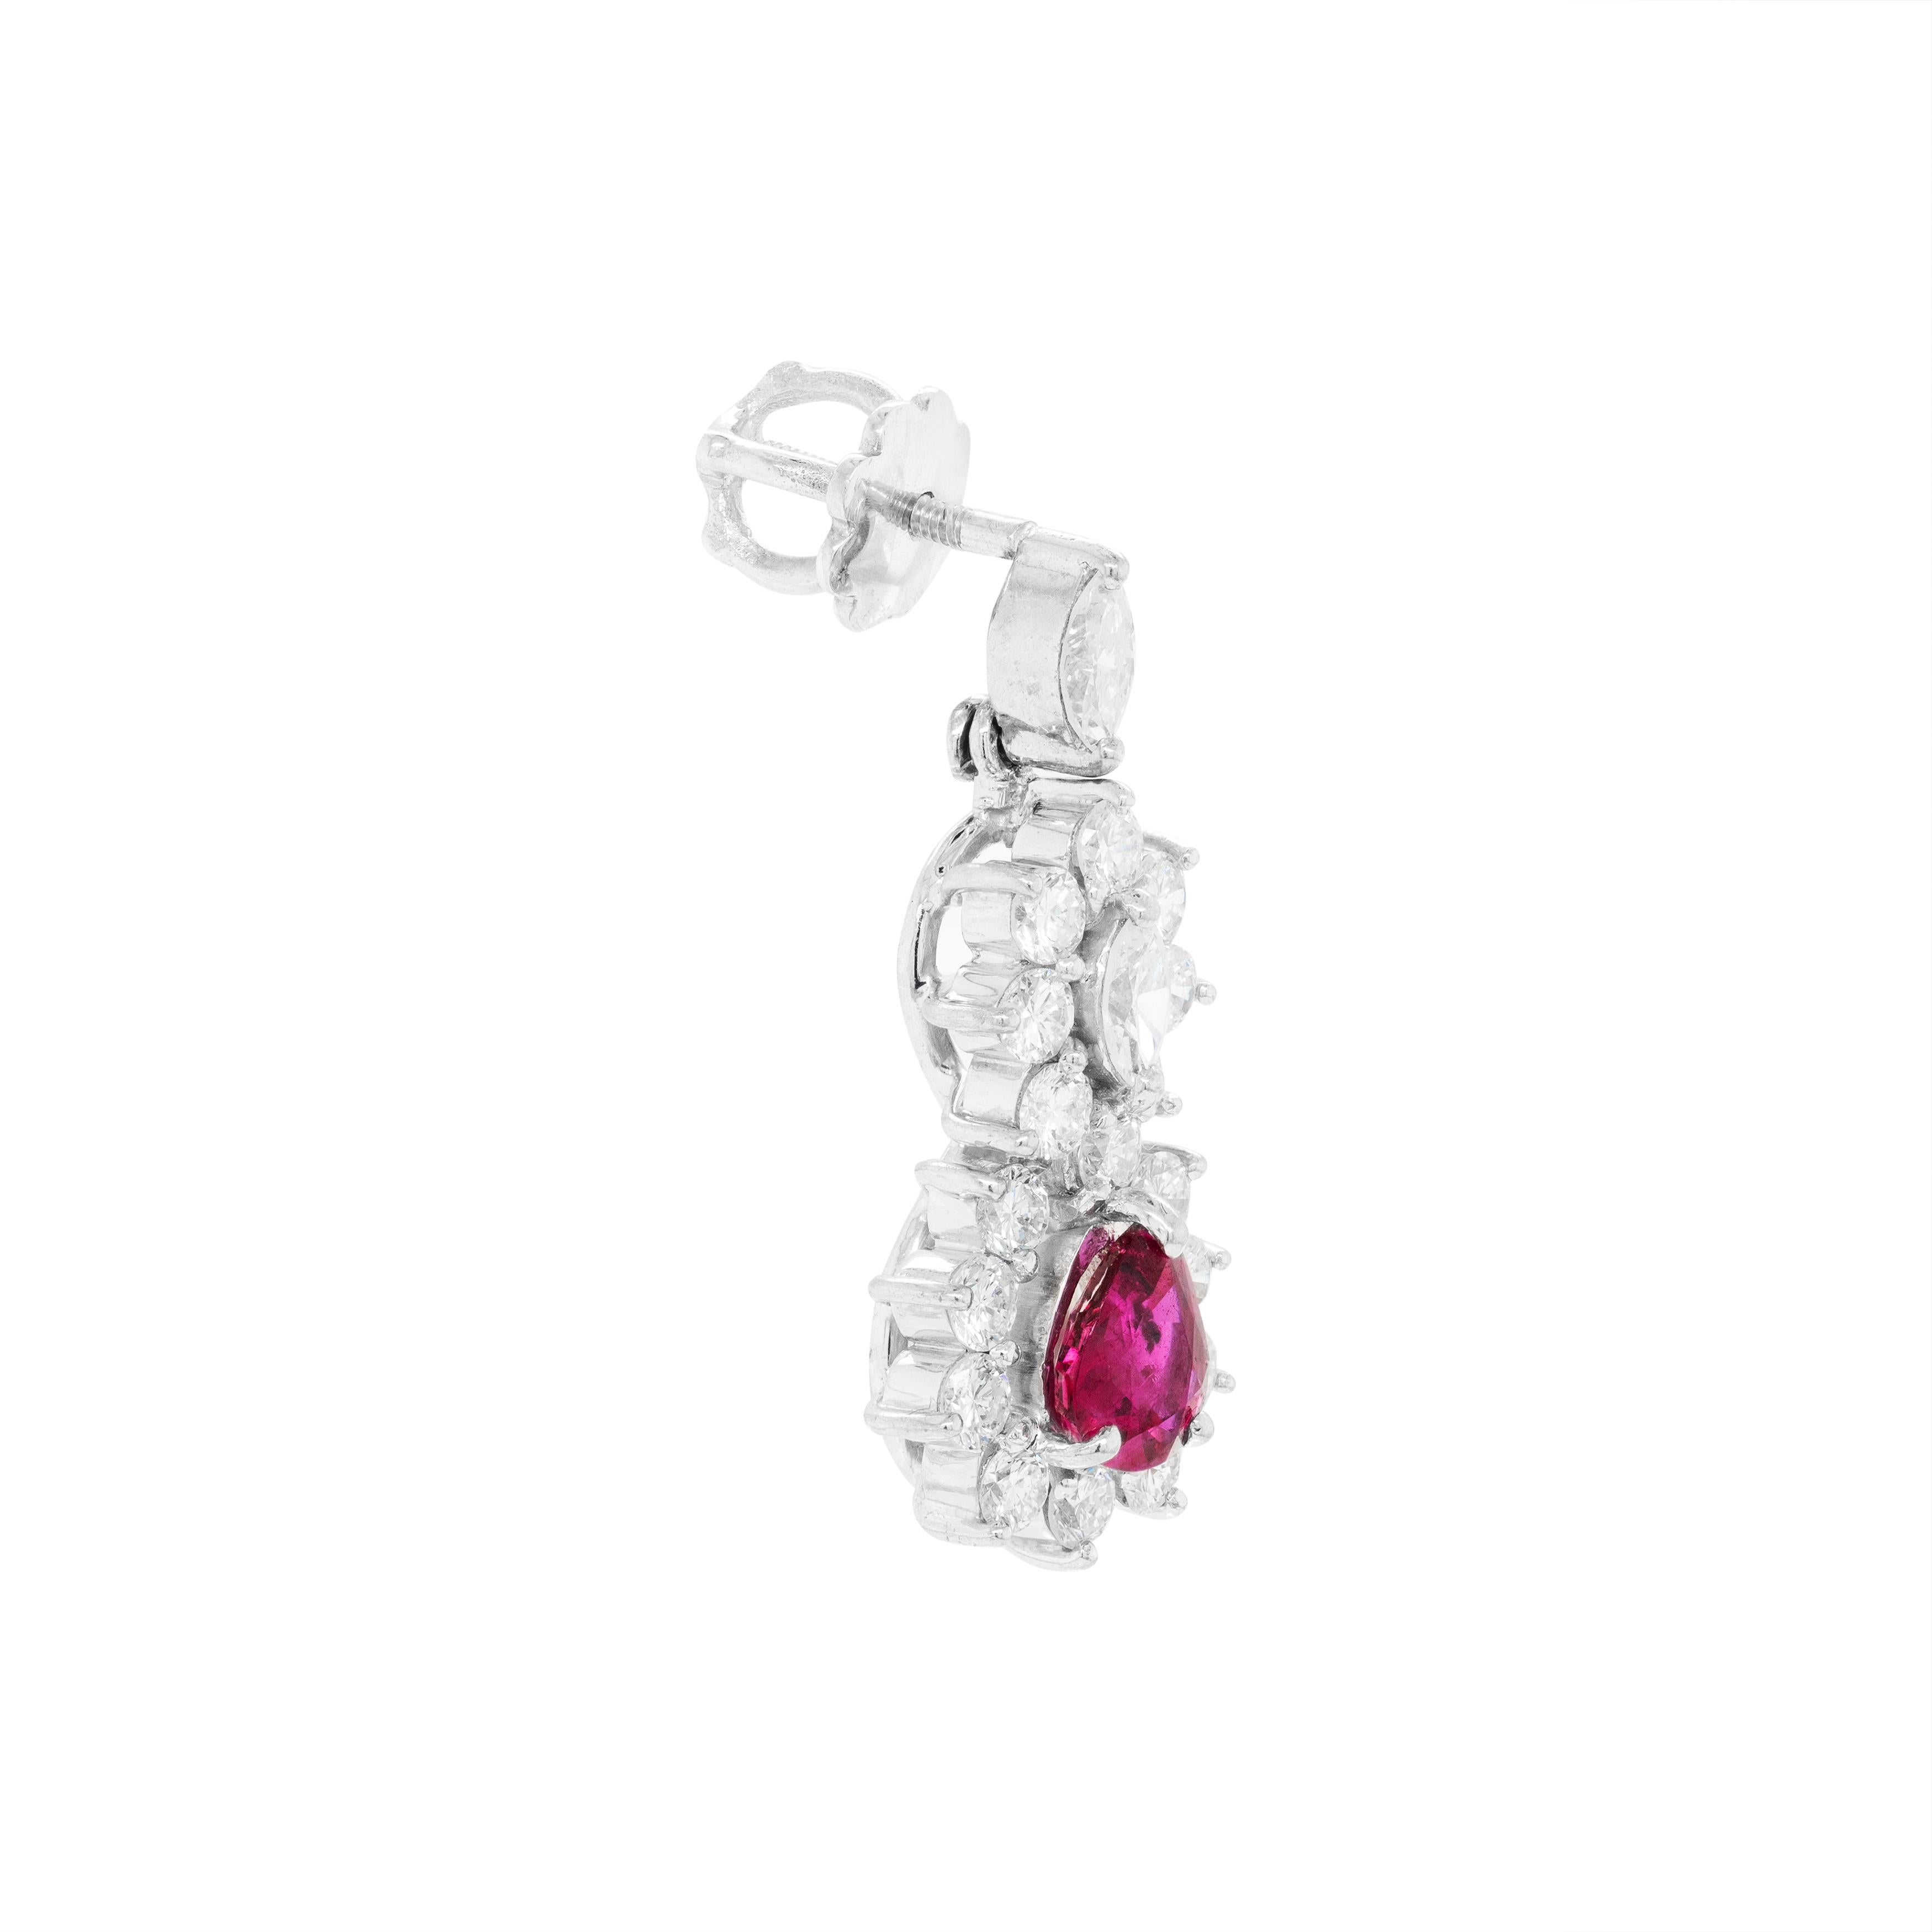 A beautiful pair of cluster earrings featuring a fine quality pear shaped ruby weighing approximately 0.55ct each in a three claw open back setting. The rubies are accompanied by a cluster of claw set marquise shaped diamonds and round brilliant cut